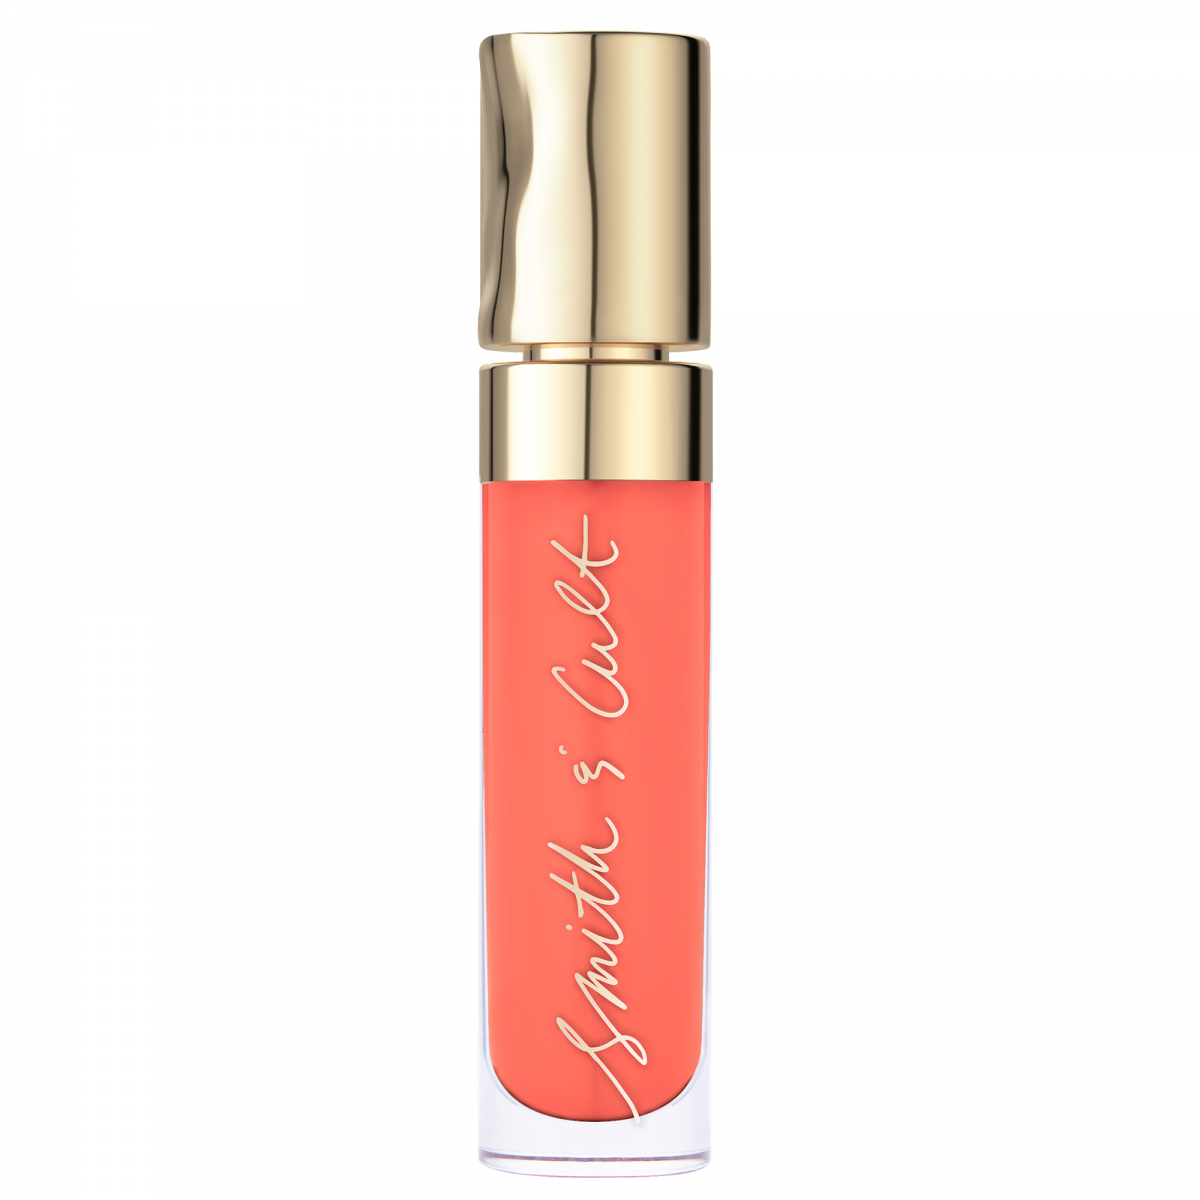 Smith & Cult The Shining Lip Lacquer - Marriage No 2 5ml - Hairsale.se